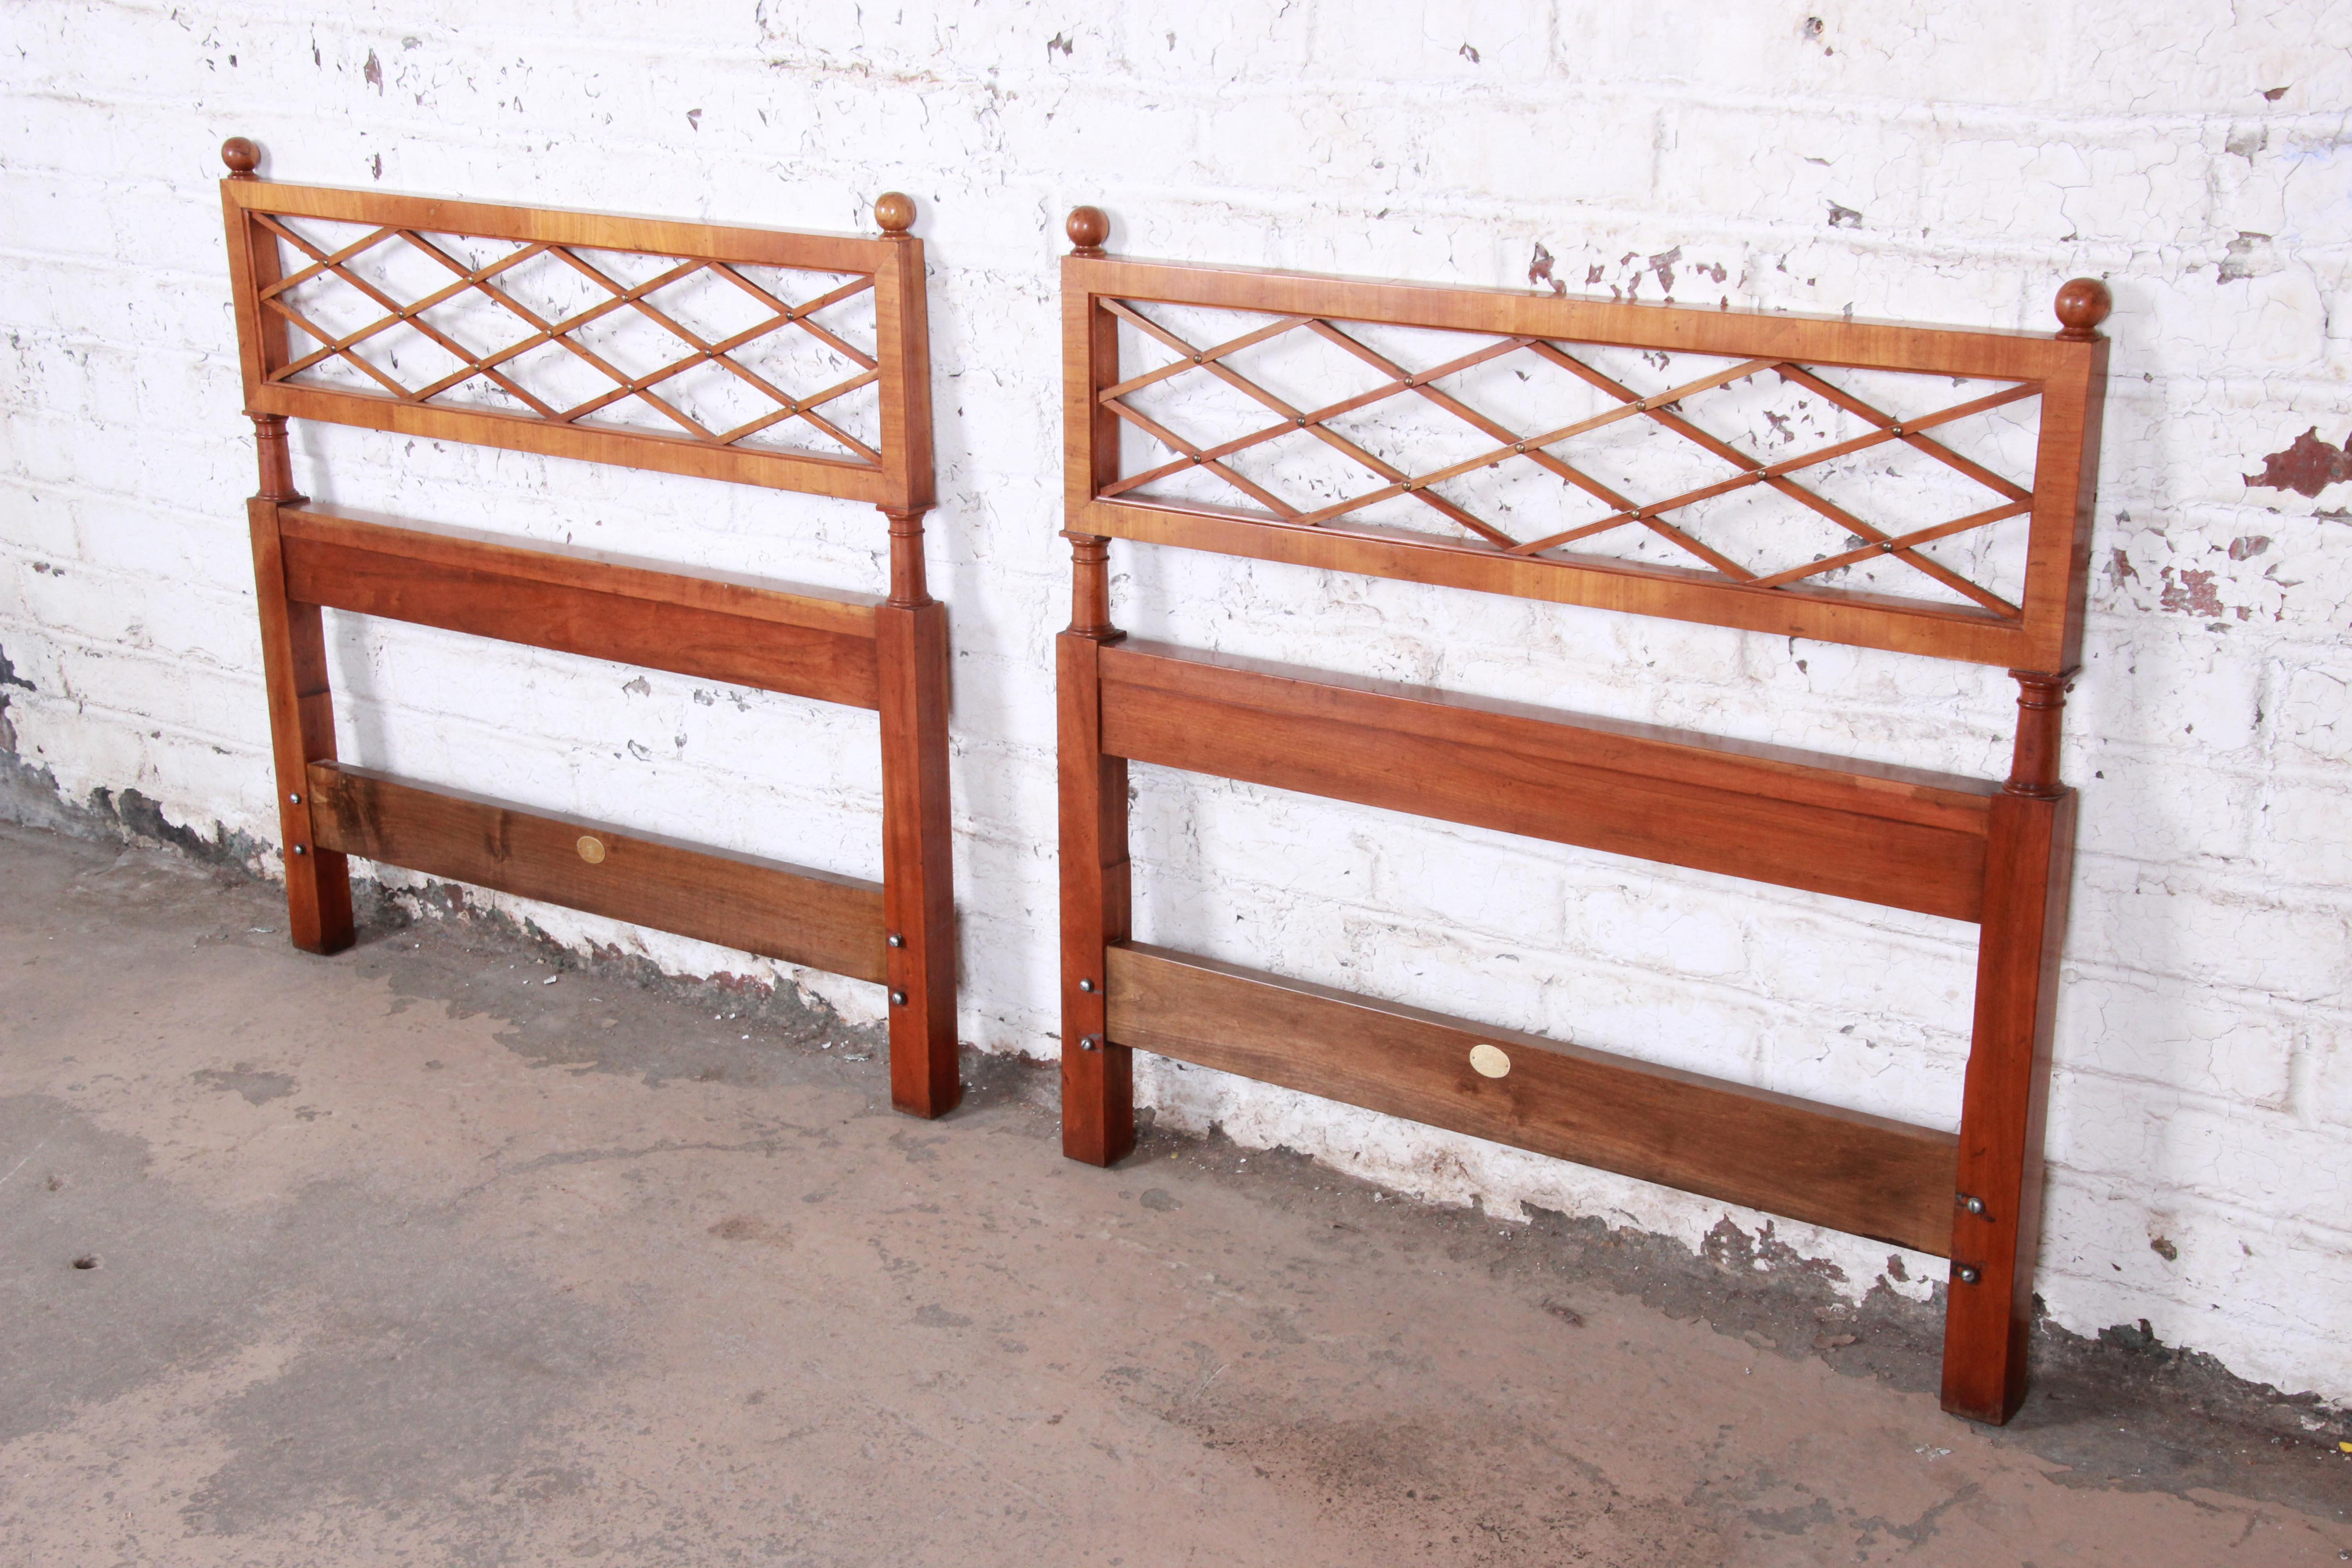 A gorgeous pair of midcentury twin headboards by Baker Furniture. The headboards feature beautiful wood grain and a nice lattice design with brass details. This pair was sold by high-end Chicago retailer John A Colby & Sons. The original Baker label